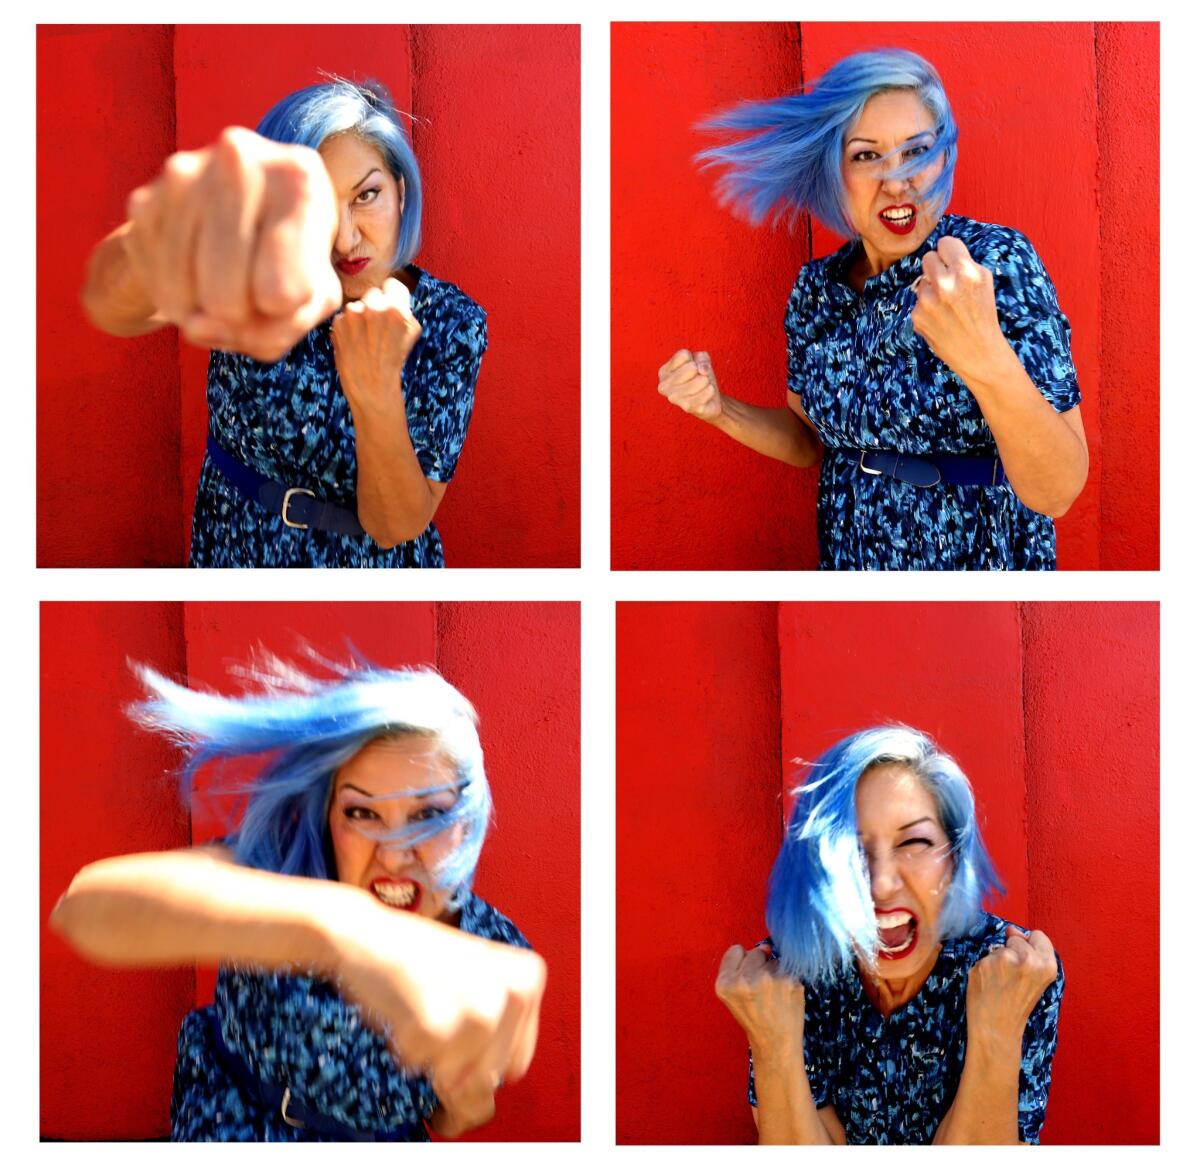 Four photos of Alice Bag, two of her punching forward and two of her holding her fists up.